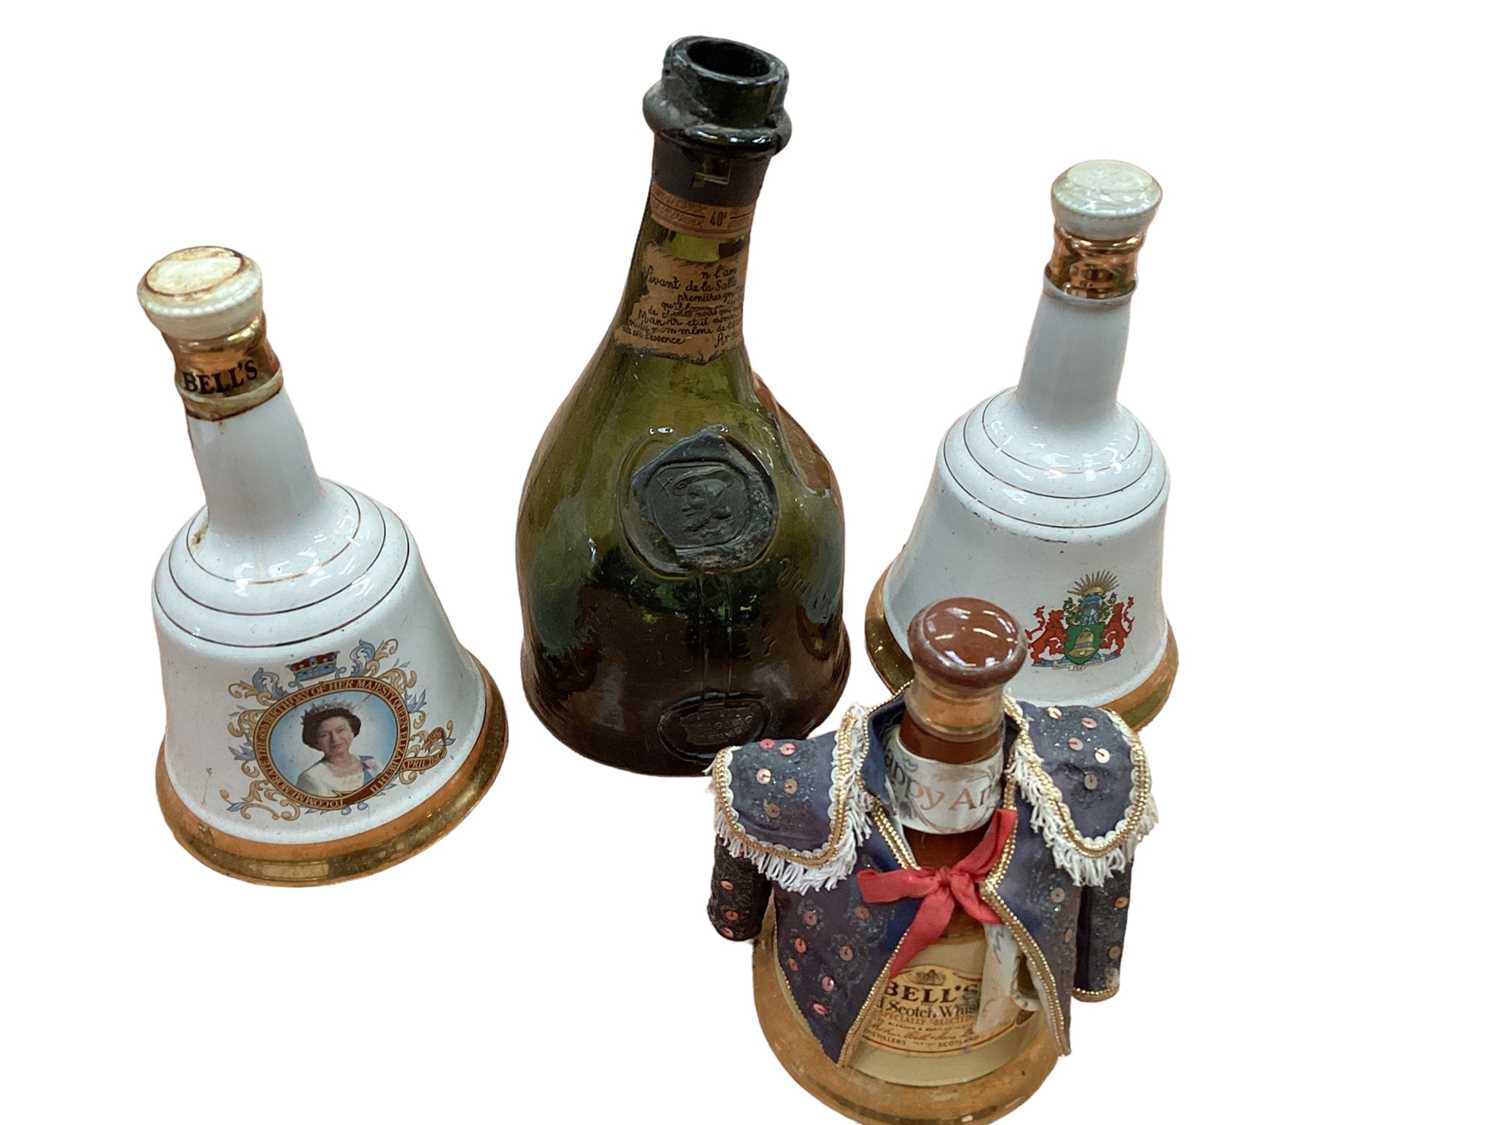 Lot 2478 - Three commemorative Bell's whisky decanters (full) and an old Armagnac bottle